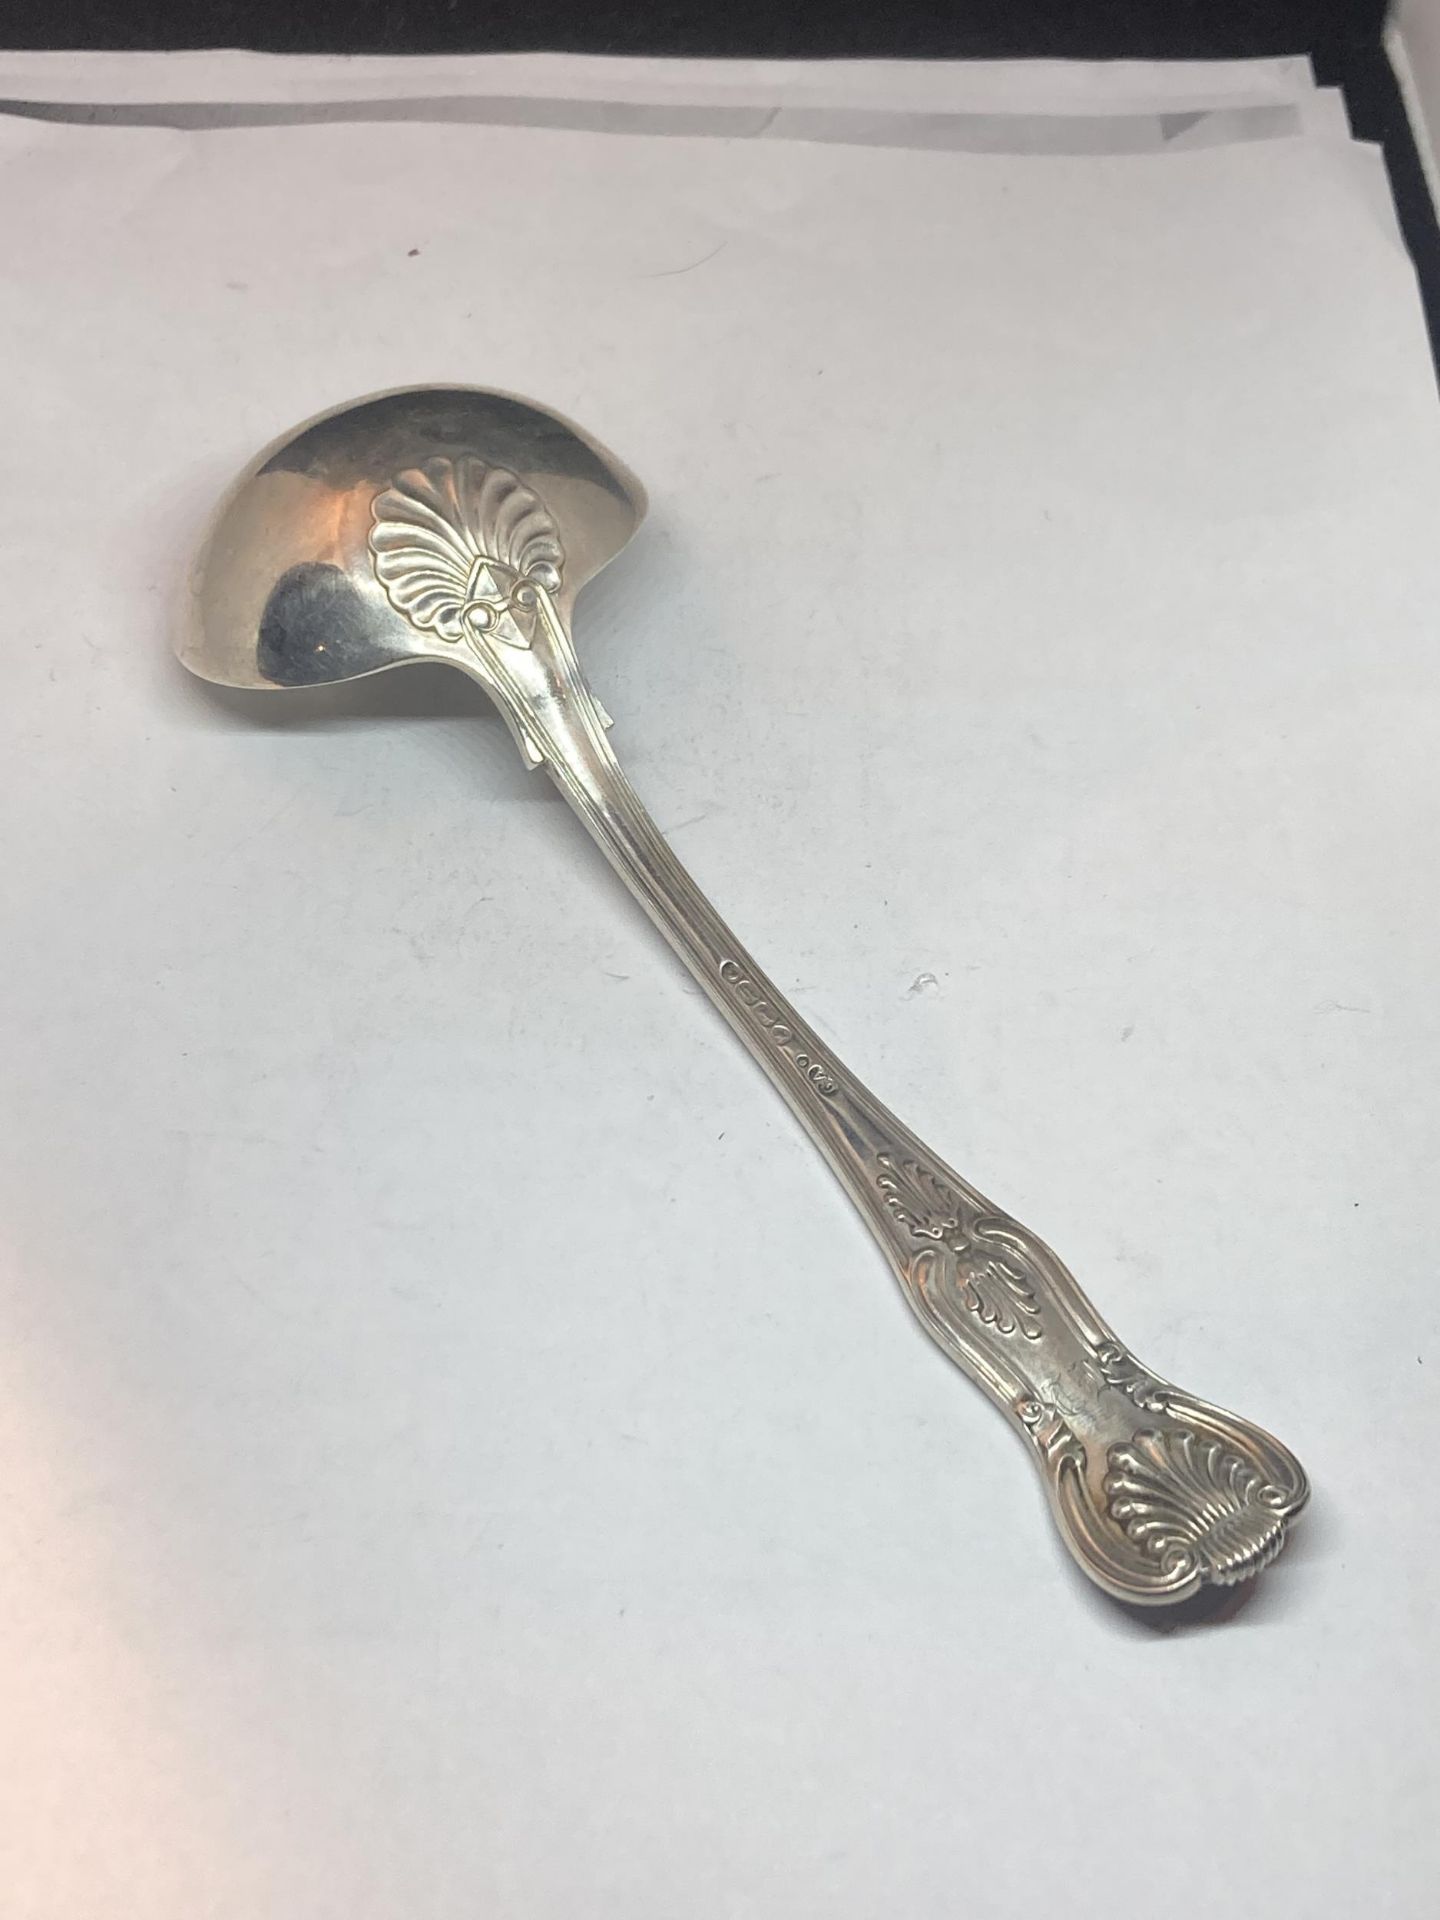 A VICTORIAN HALLMARKED LONDON SILVER LADLE - Image 2 of 3